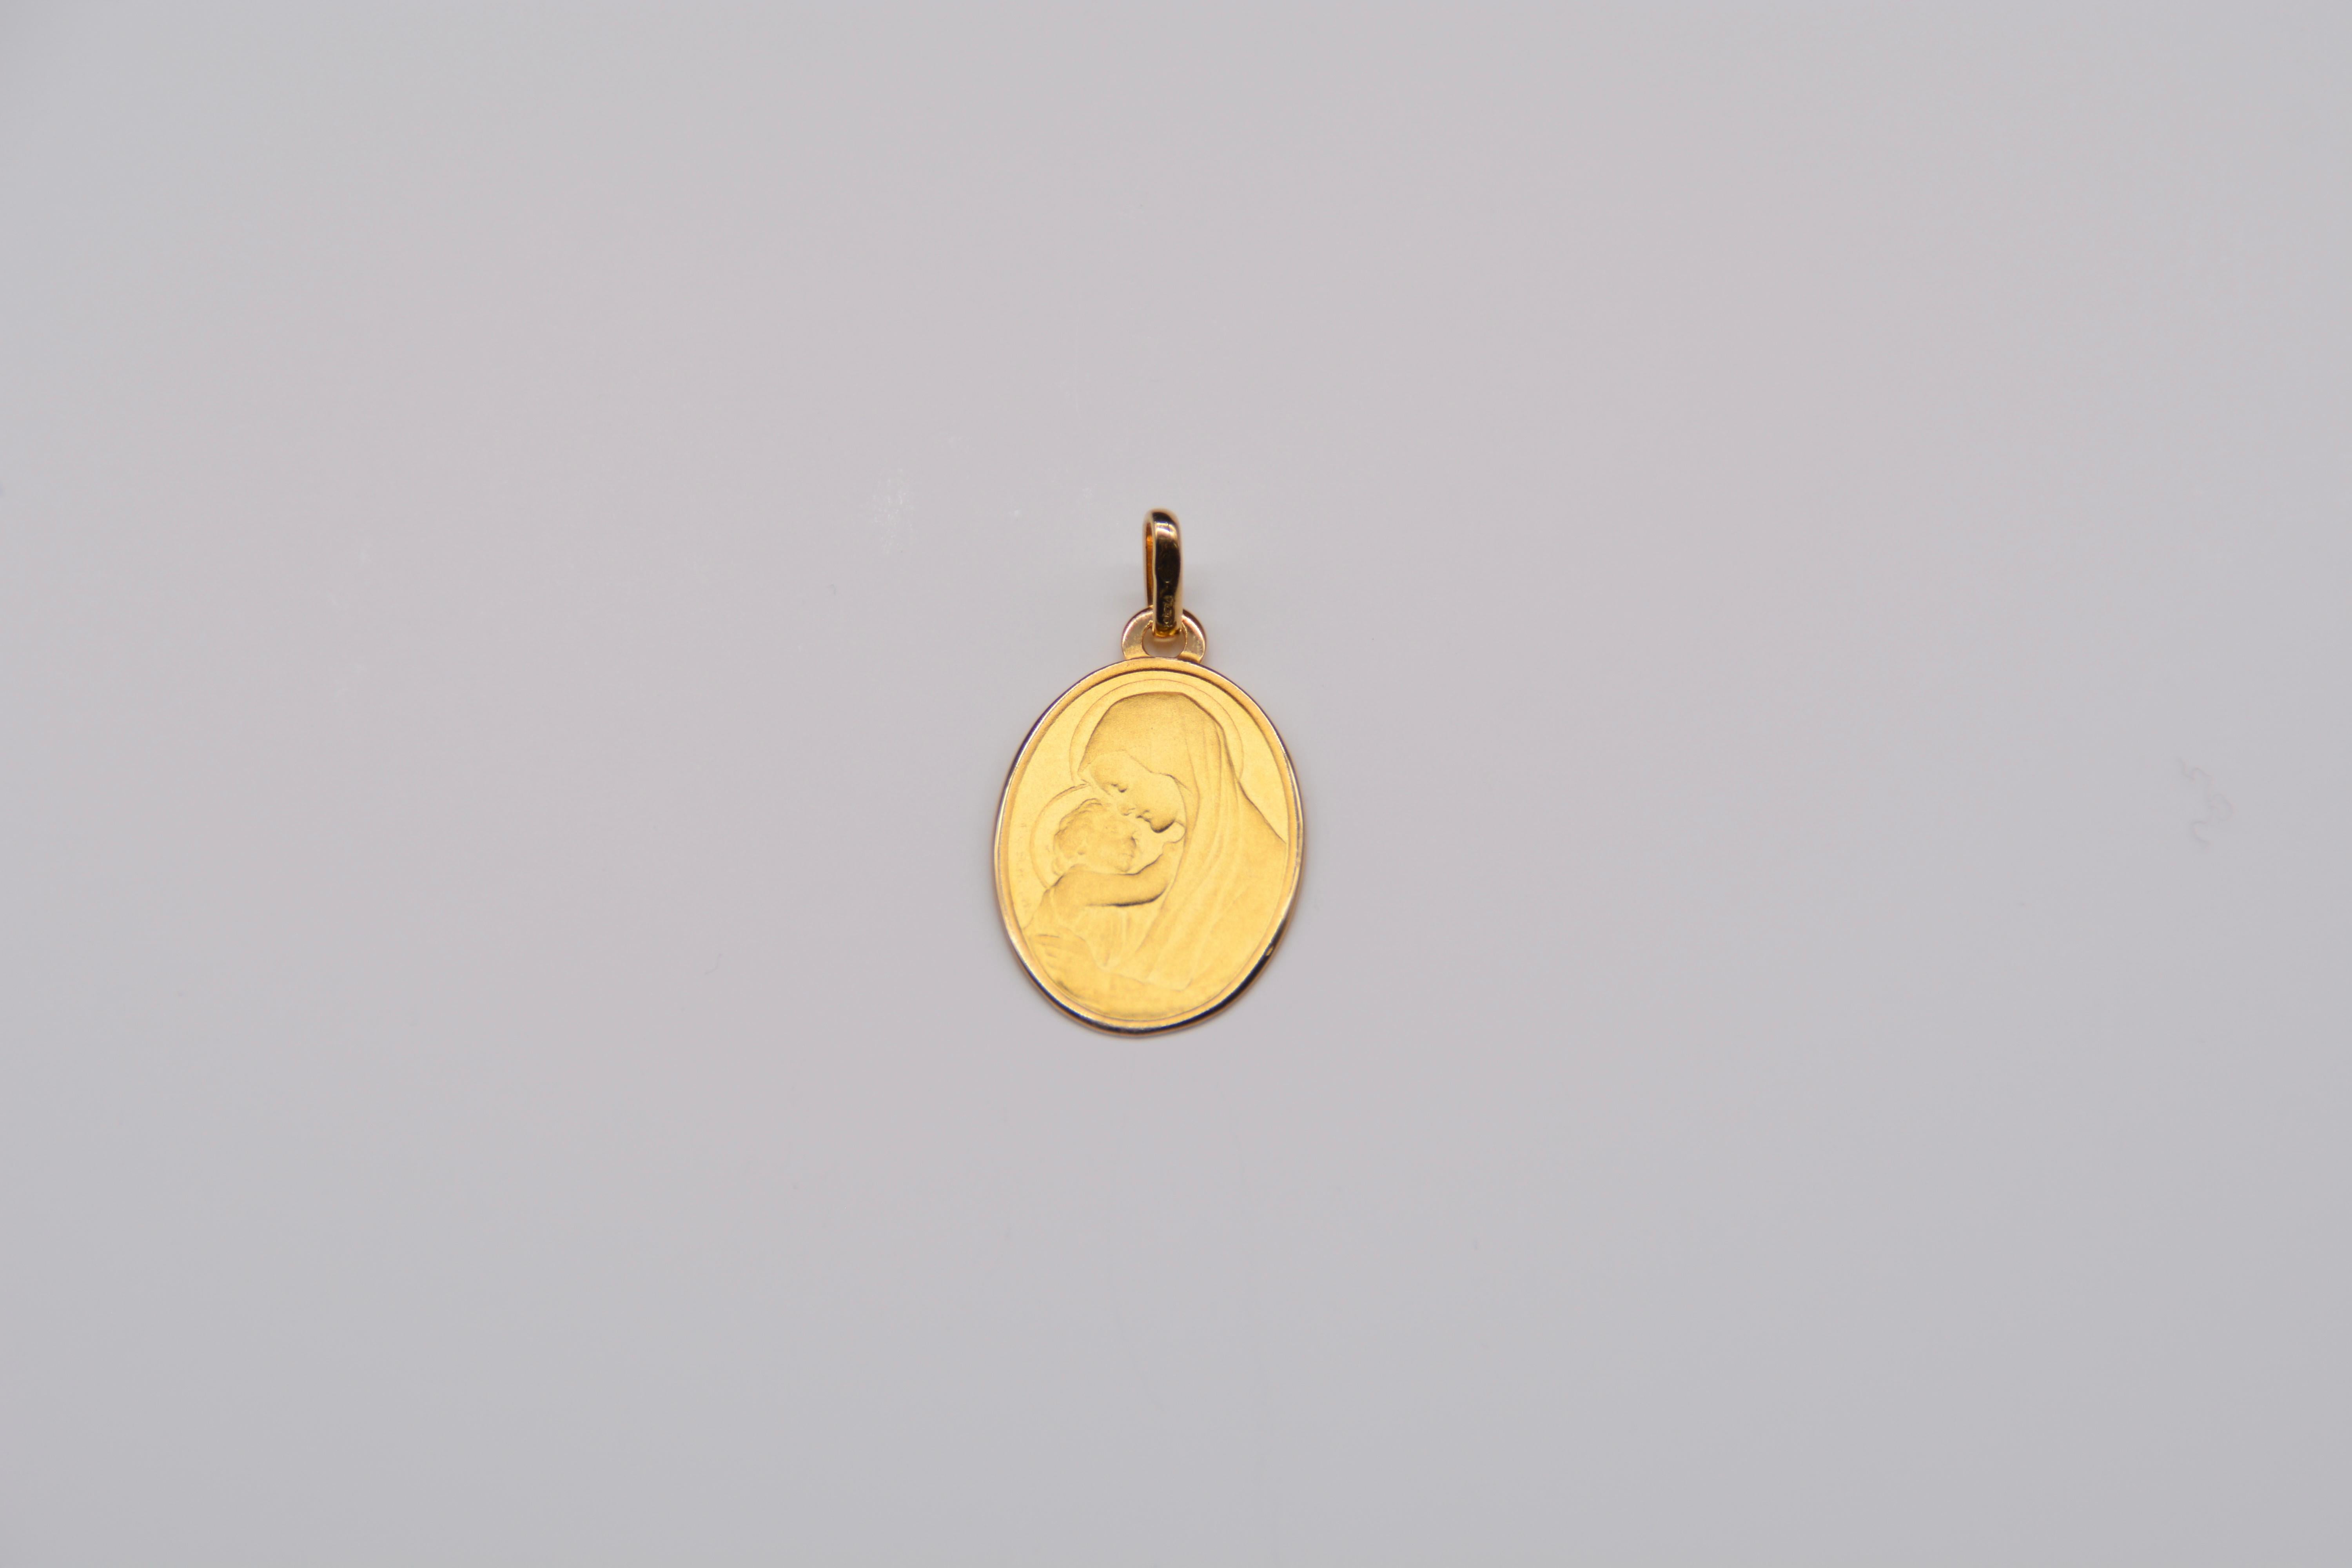 Medal Pendant - Virgin to Child

The Virgin Mary medal in yellow gold with child is an elegant and refined piece of jewellery that bears witness to high quality craftsmanship. The oval shape of the medal is accentuated by polished edges, which give